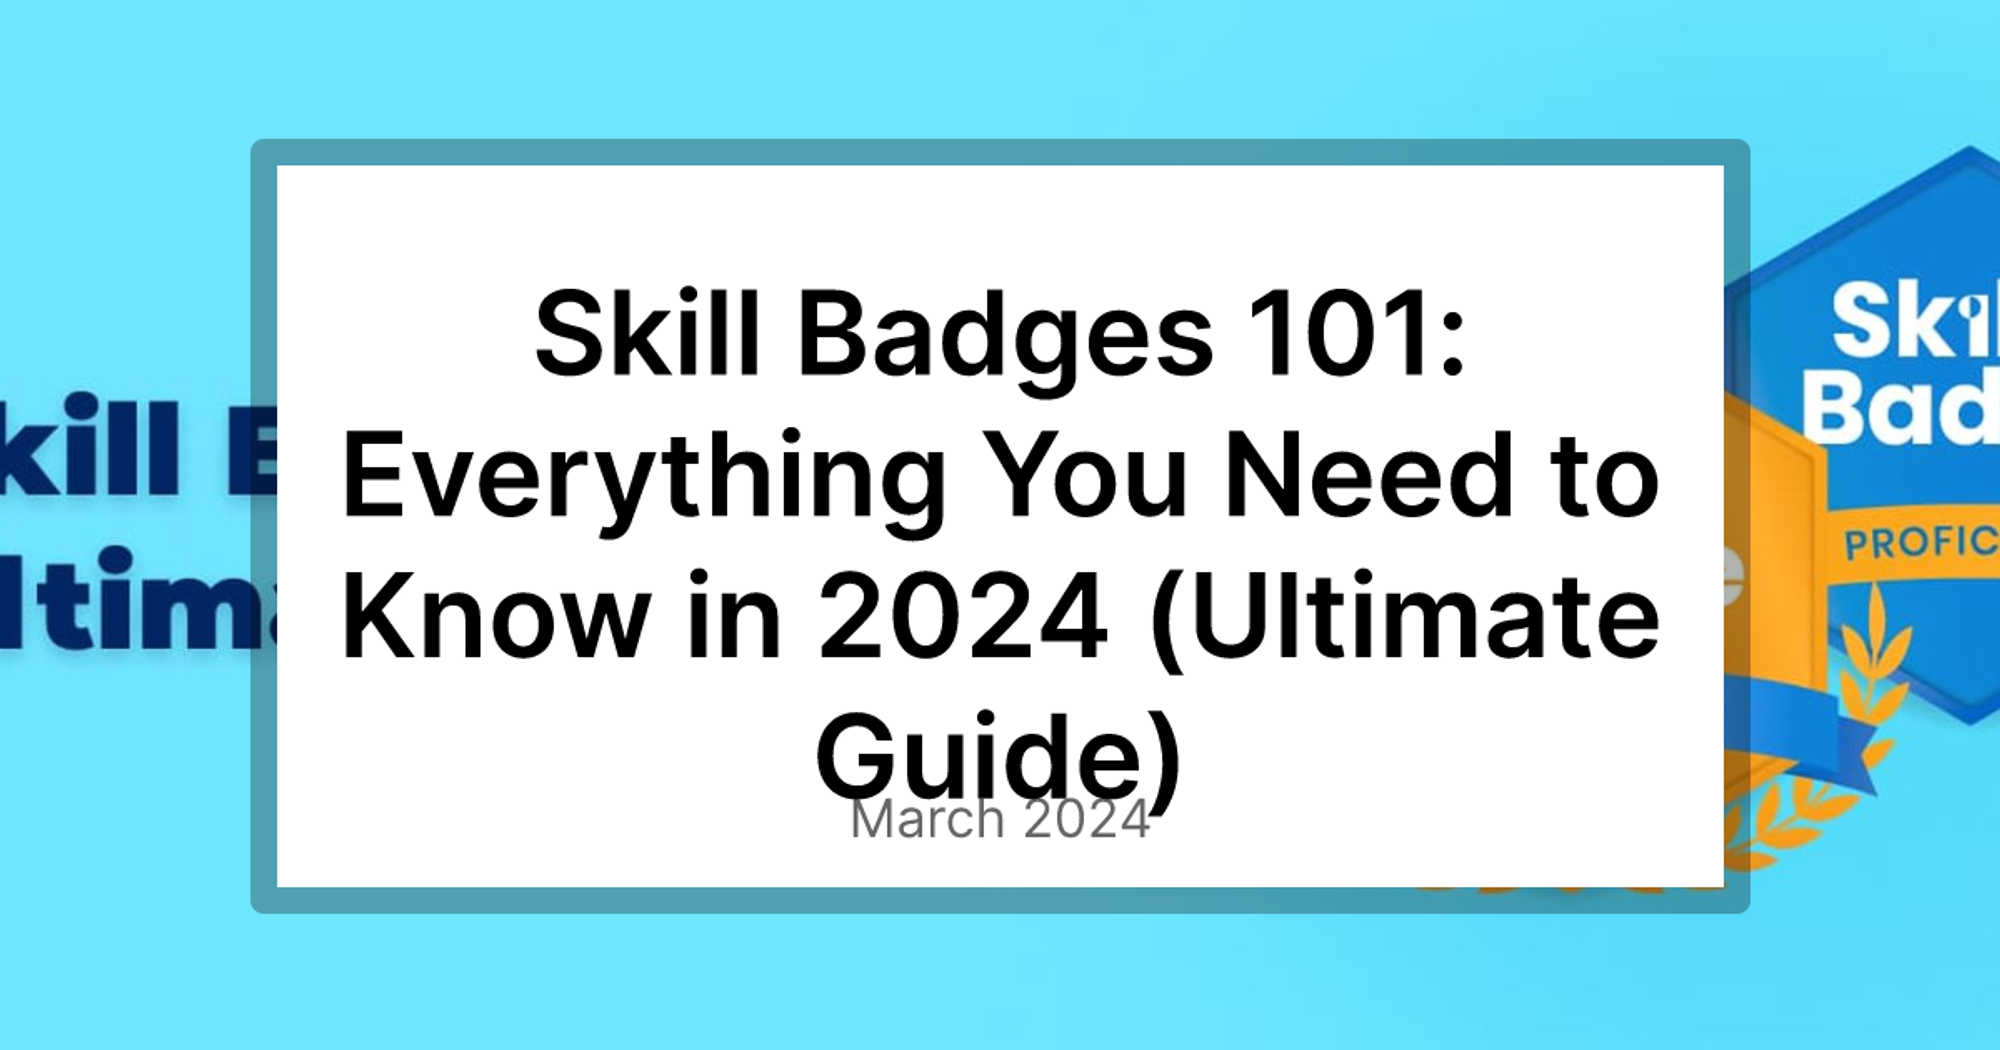 Skill Badges 101: Everything You Need to Know in 2024 (Ultimate Guide)